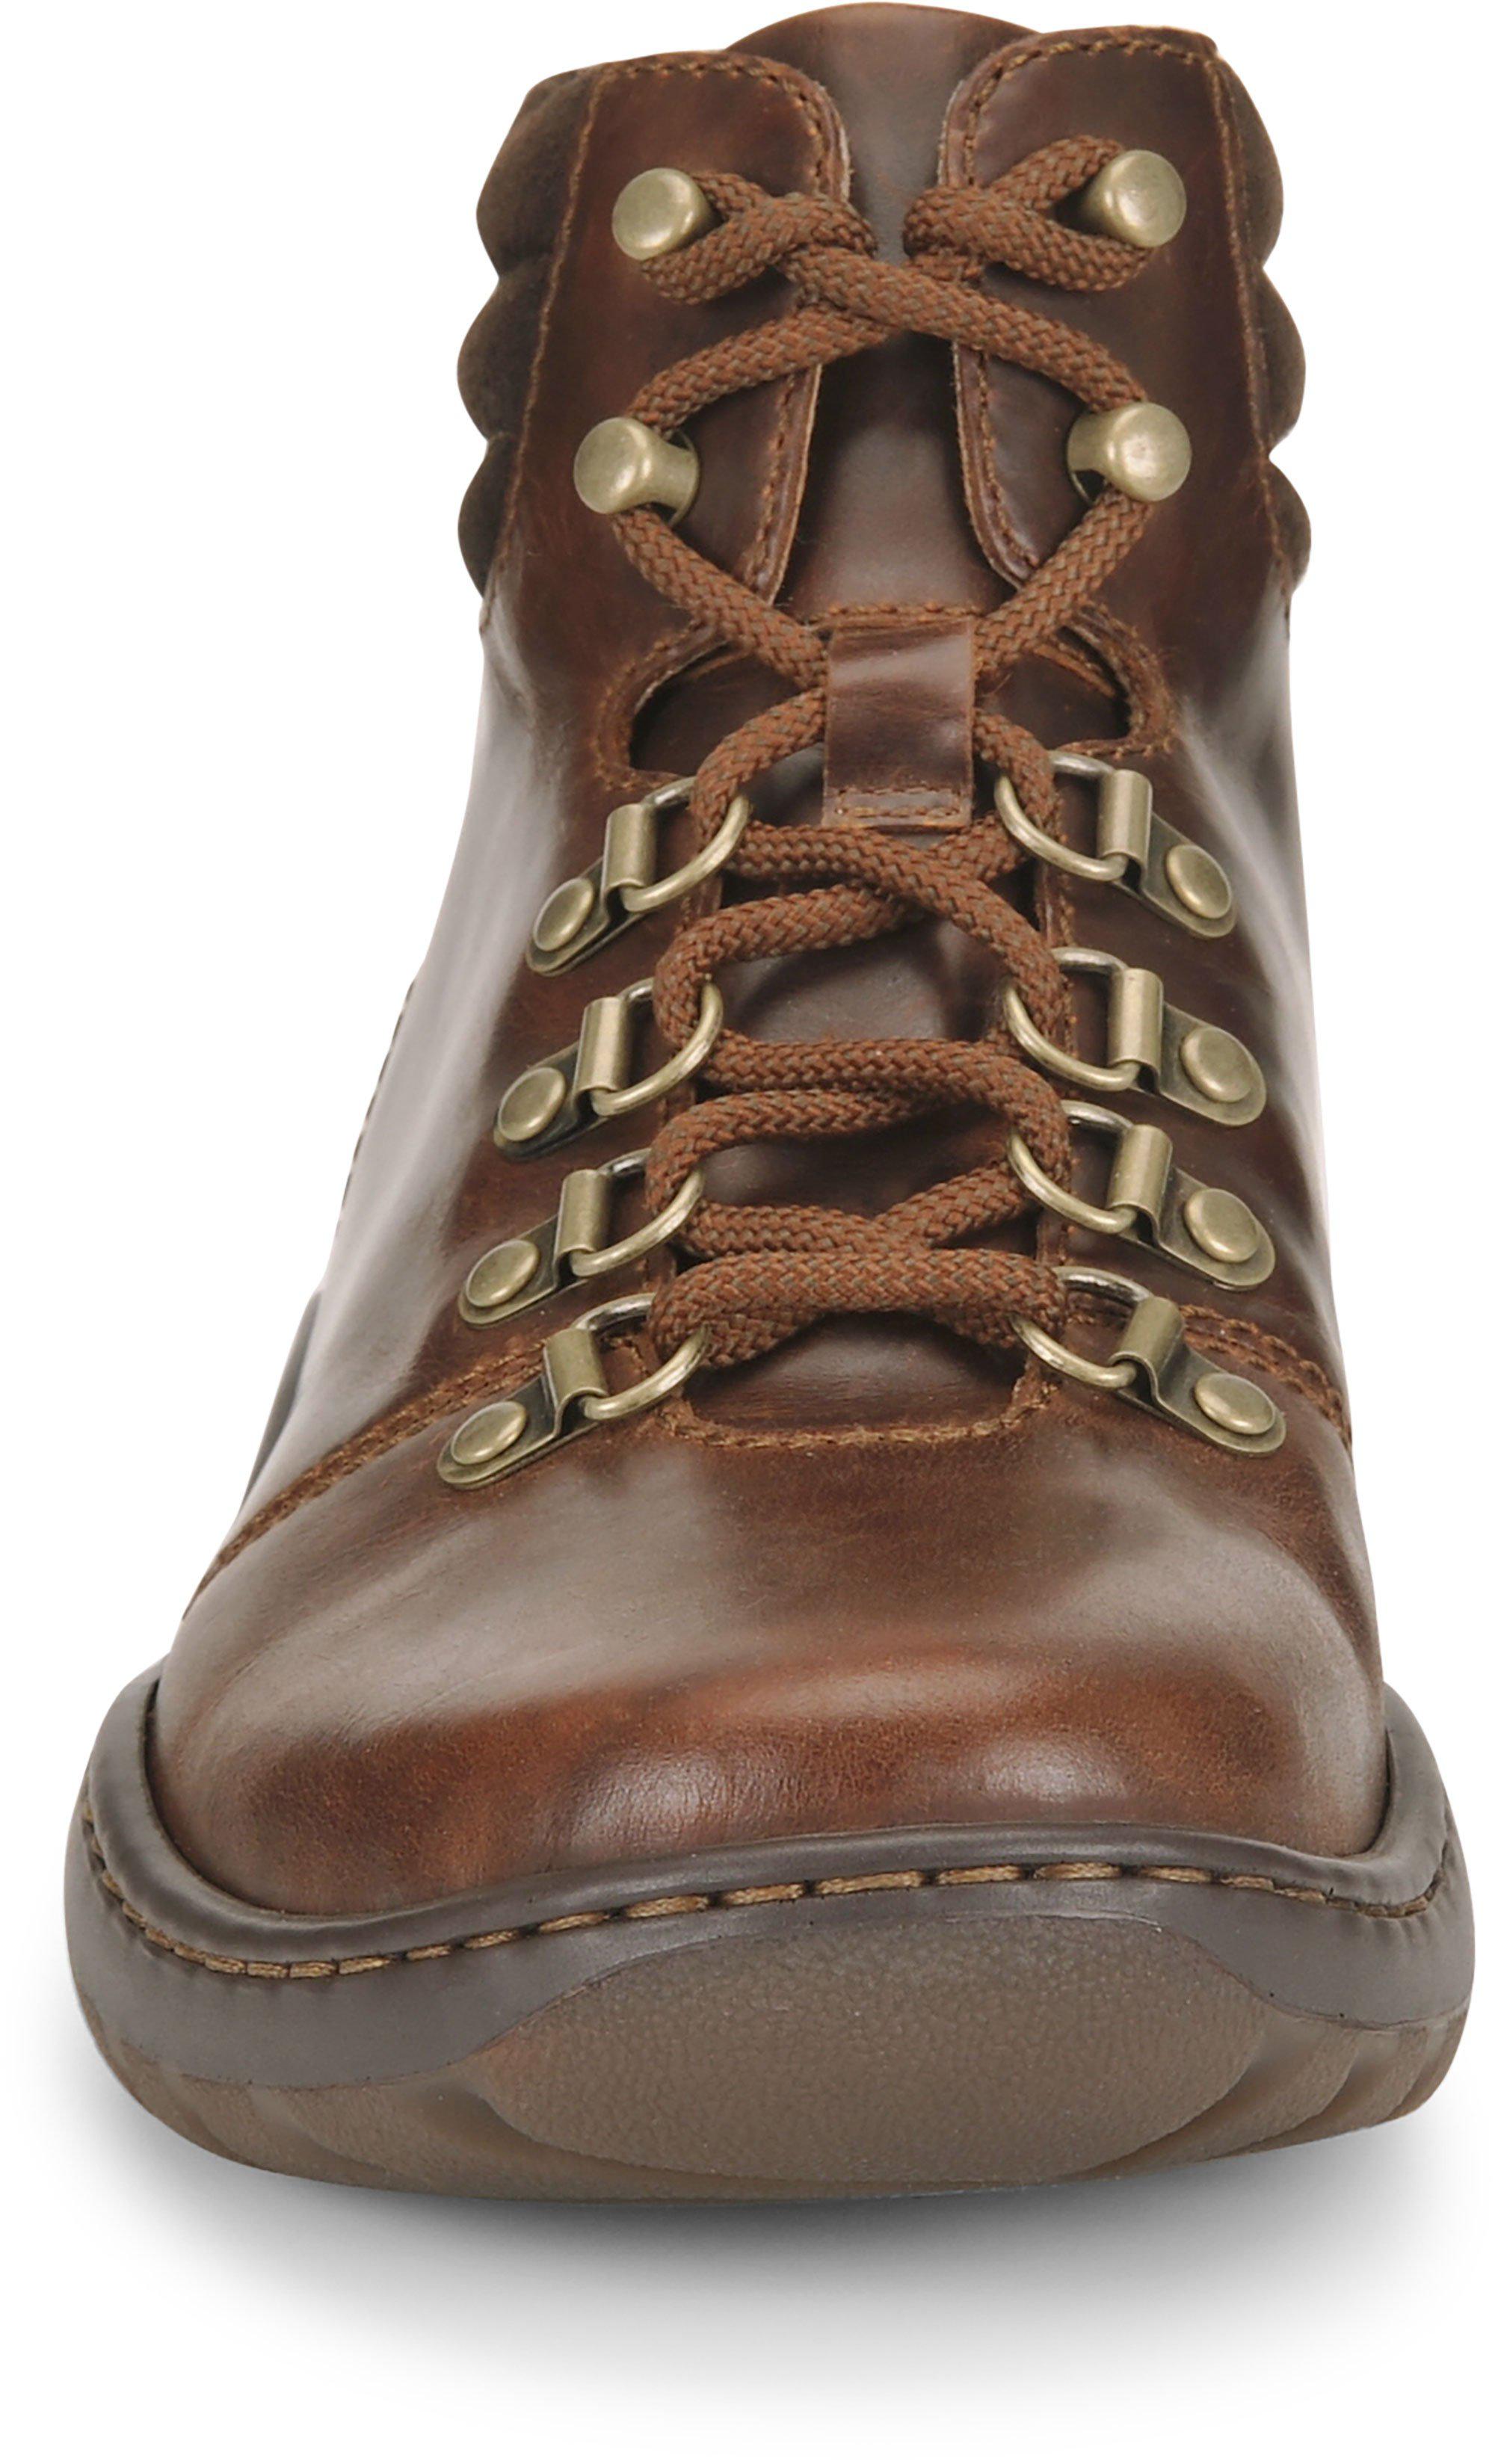 Lyst - Born Shoes Dutchman Boot in Brown for Men